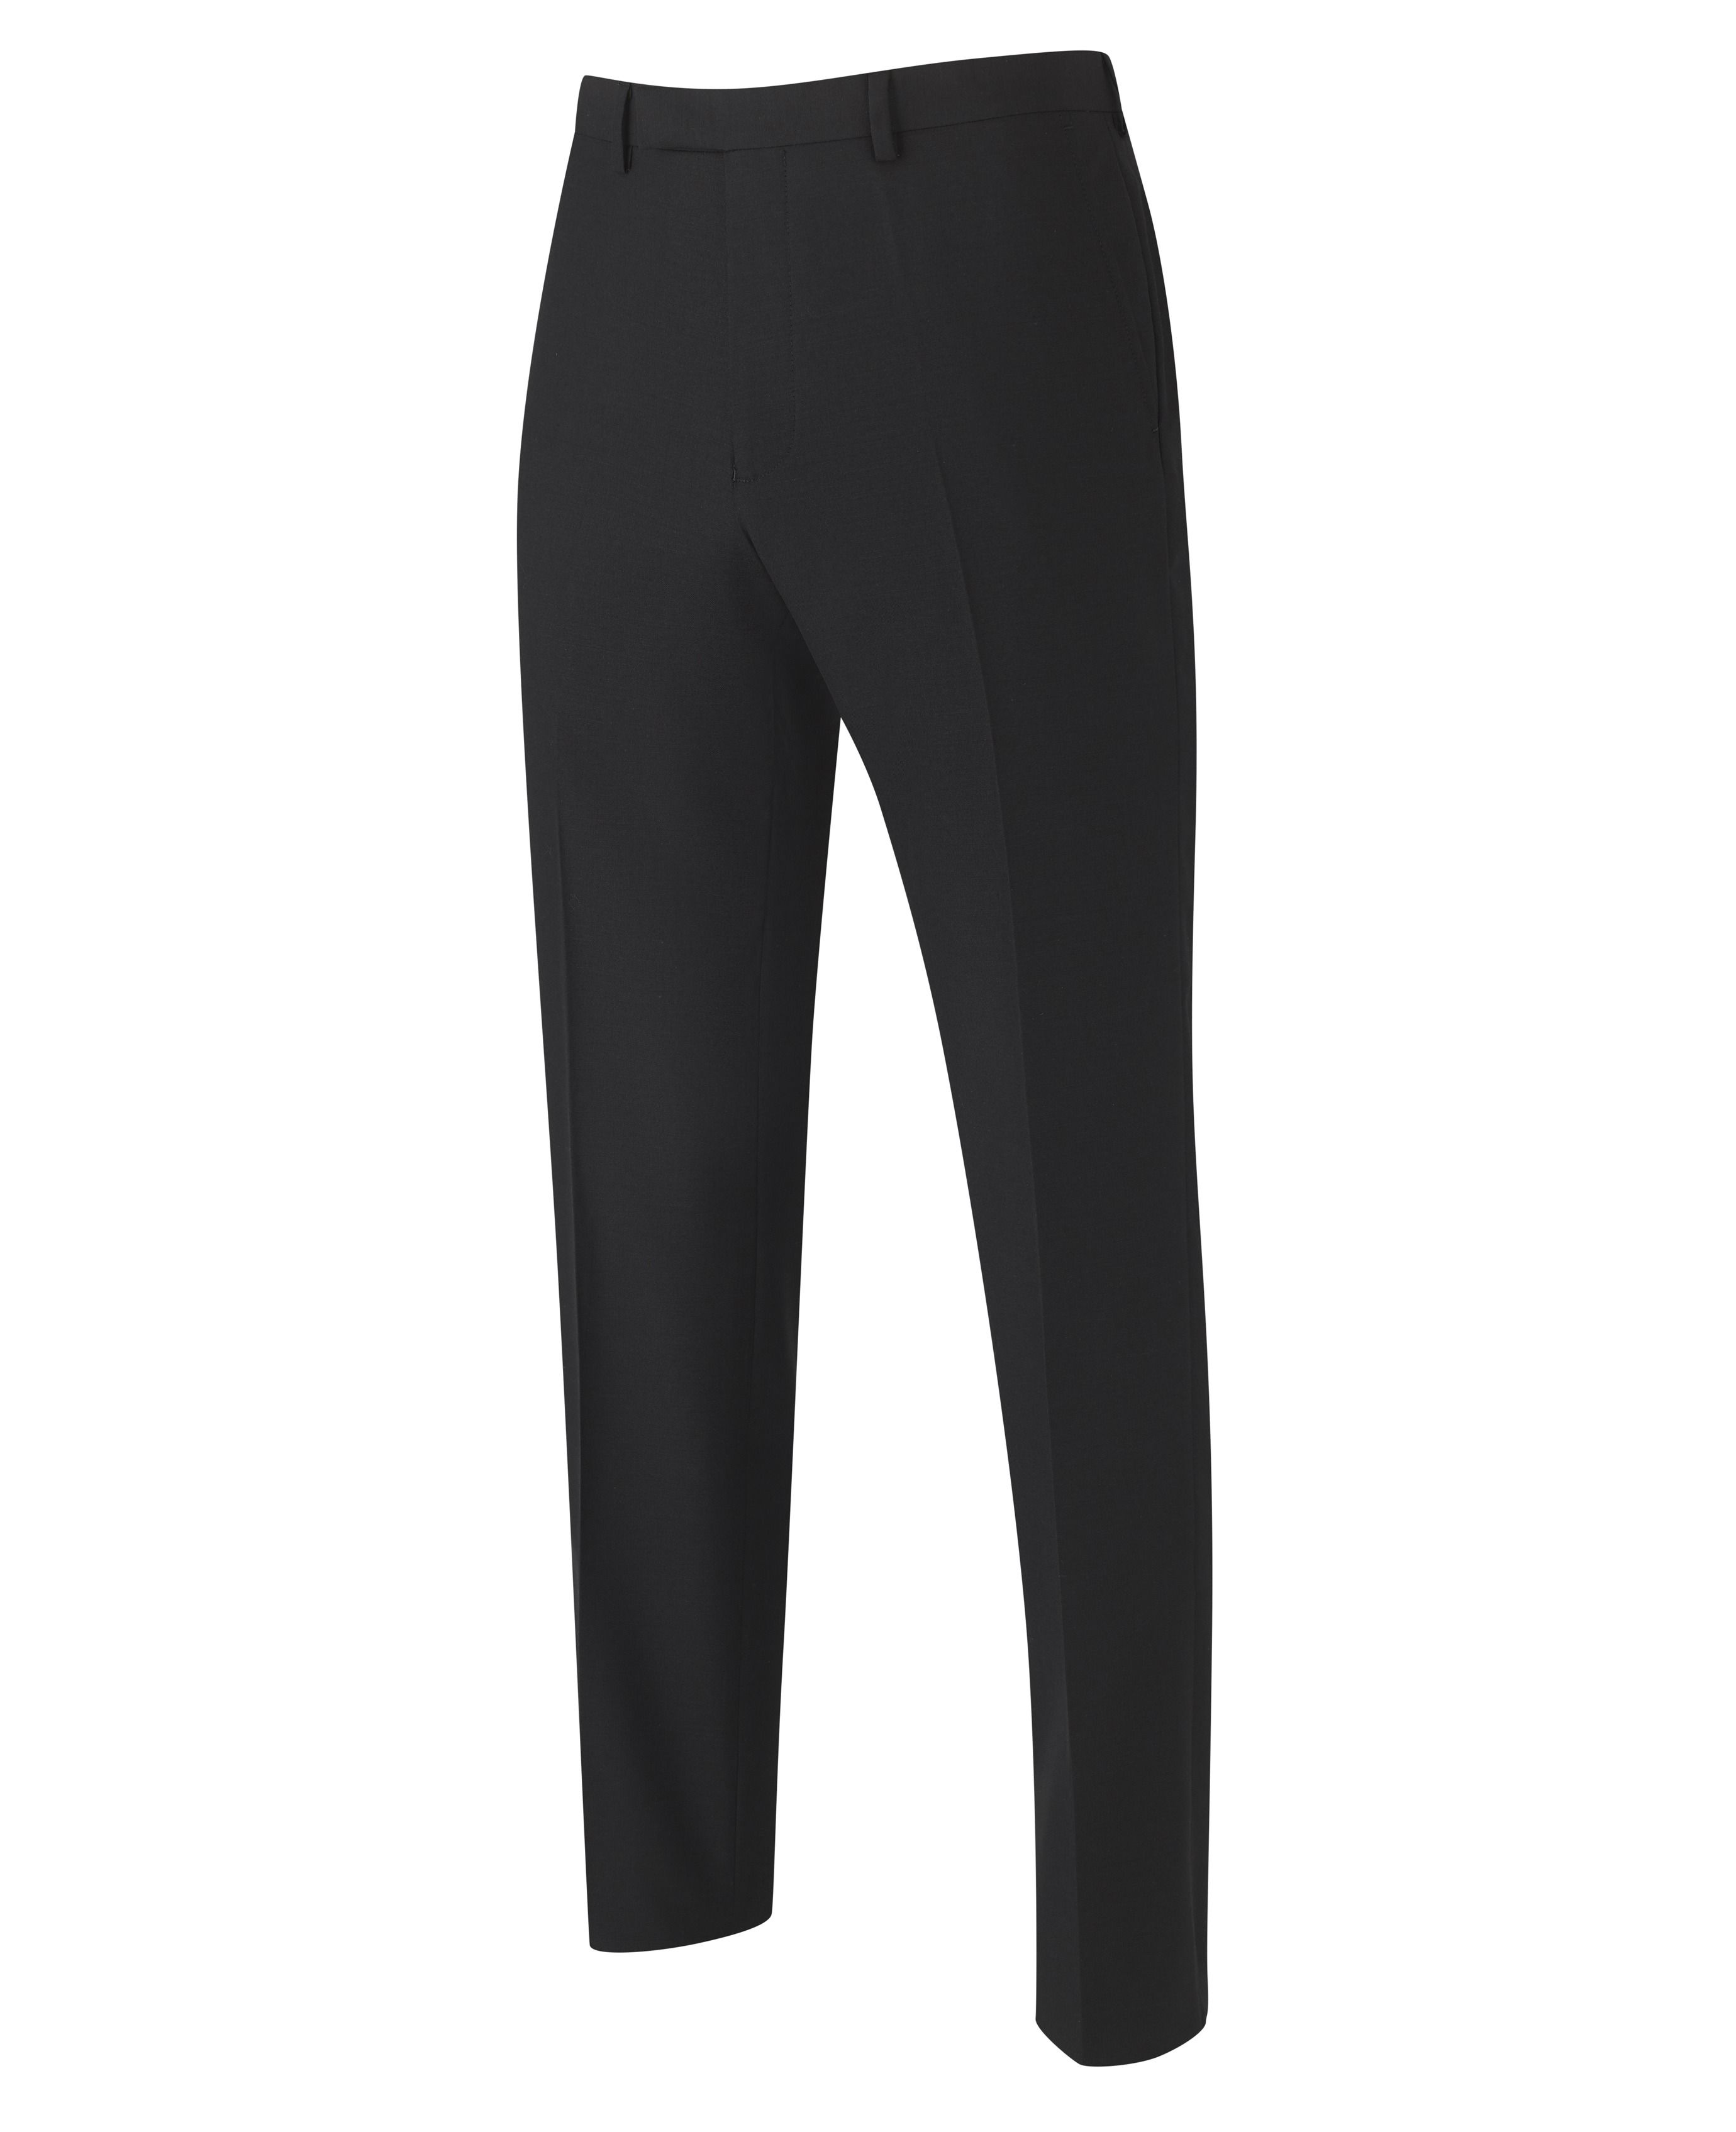 Mens Black Tailored Regular Fit Suit Trousers Company